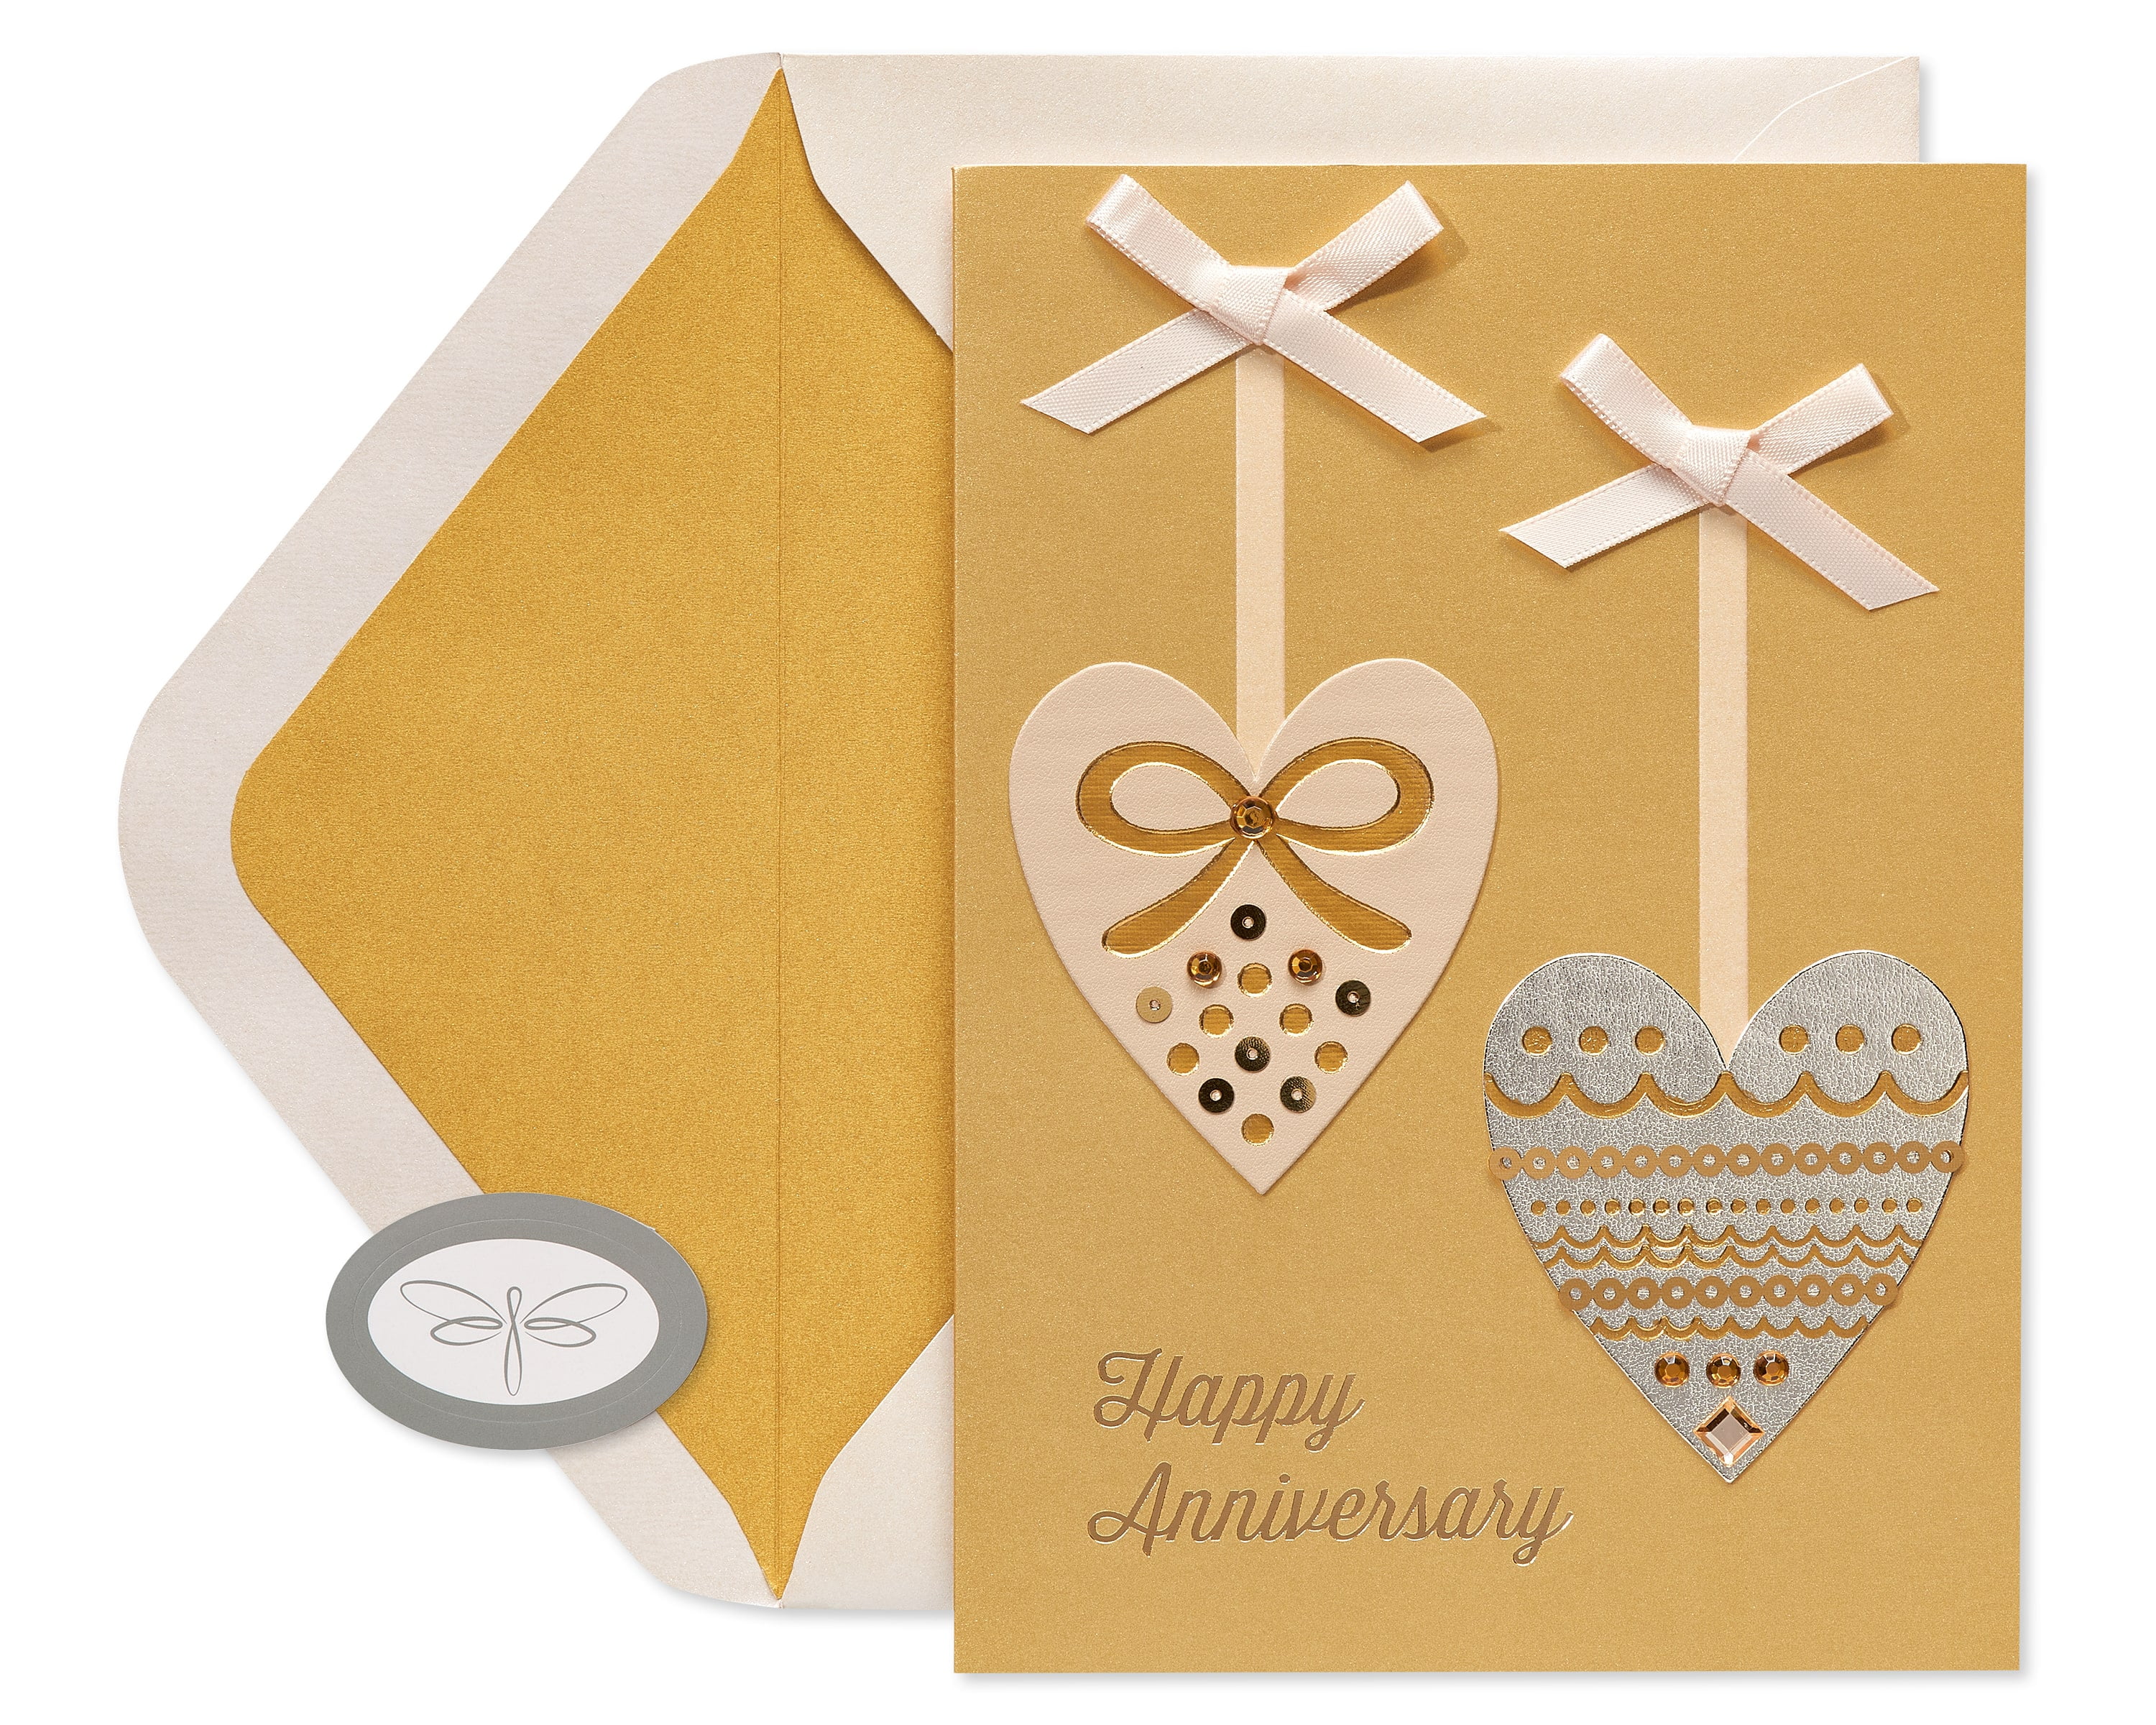 Papersong Premium Anniversary Card (Smile)